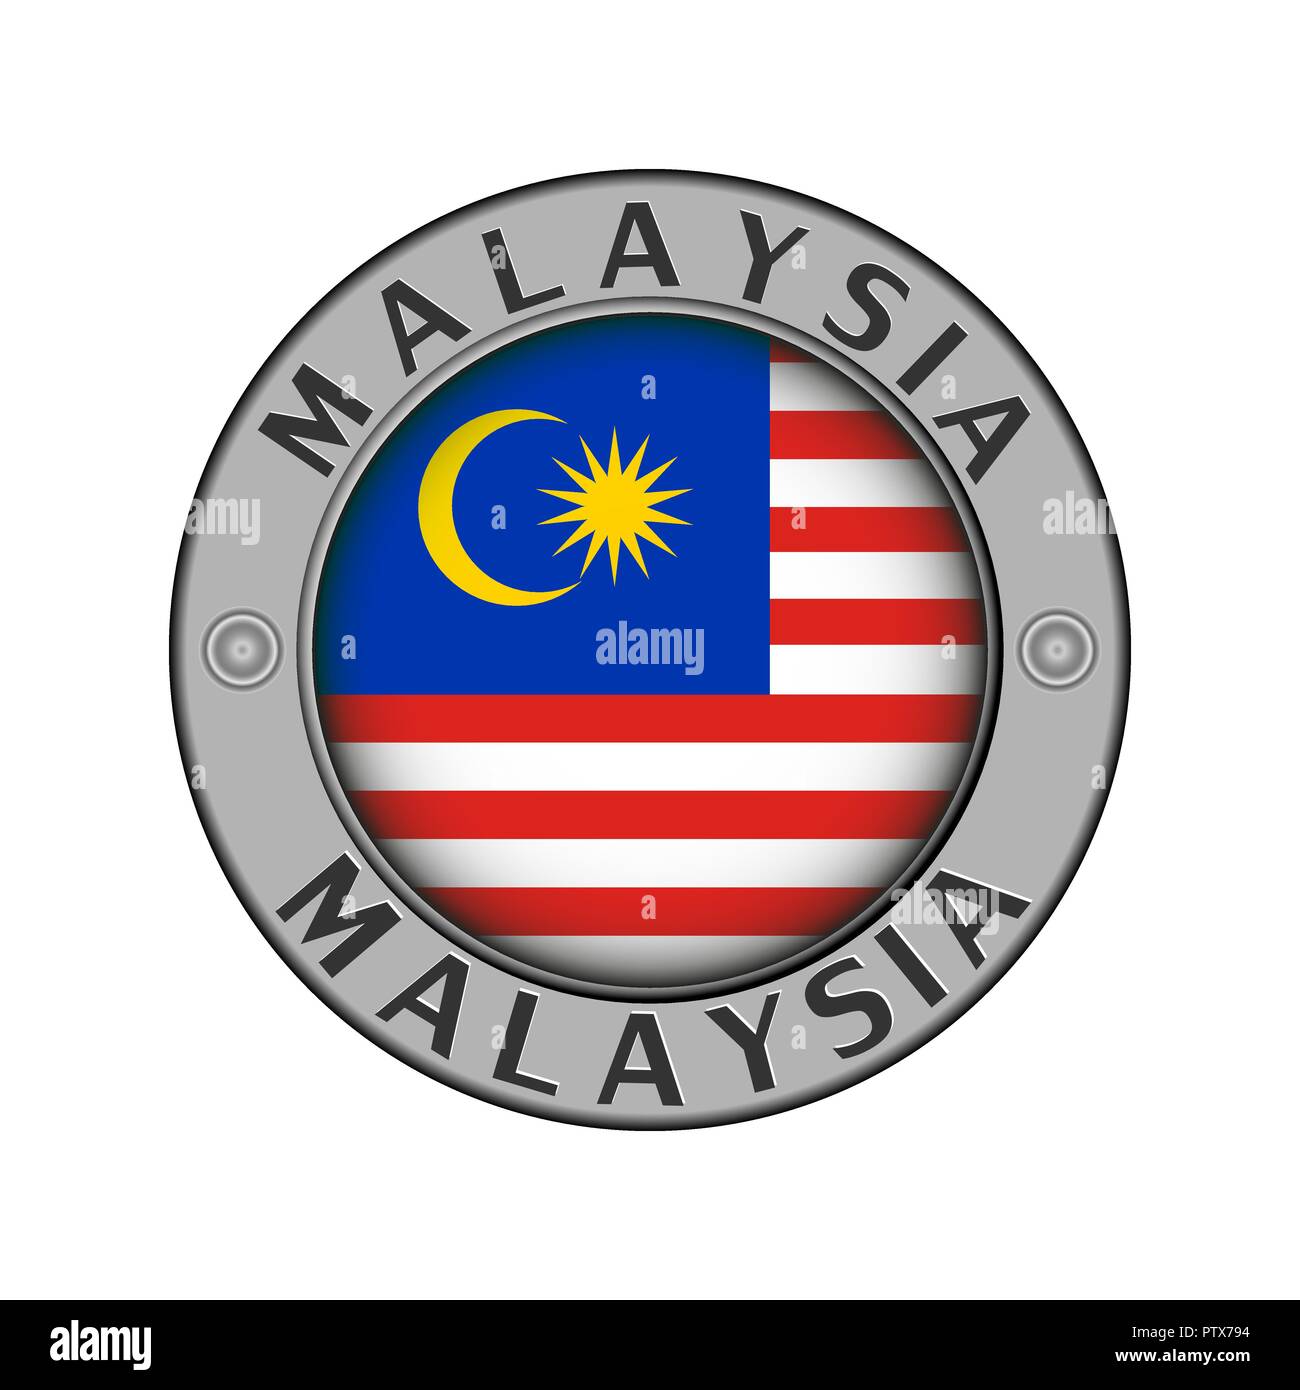 Image result for Malaysia name